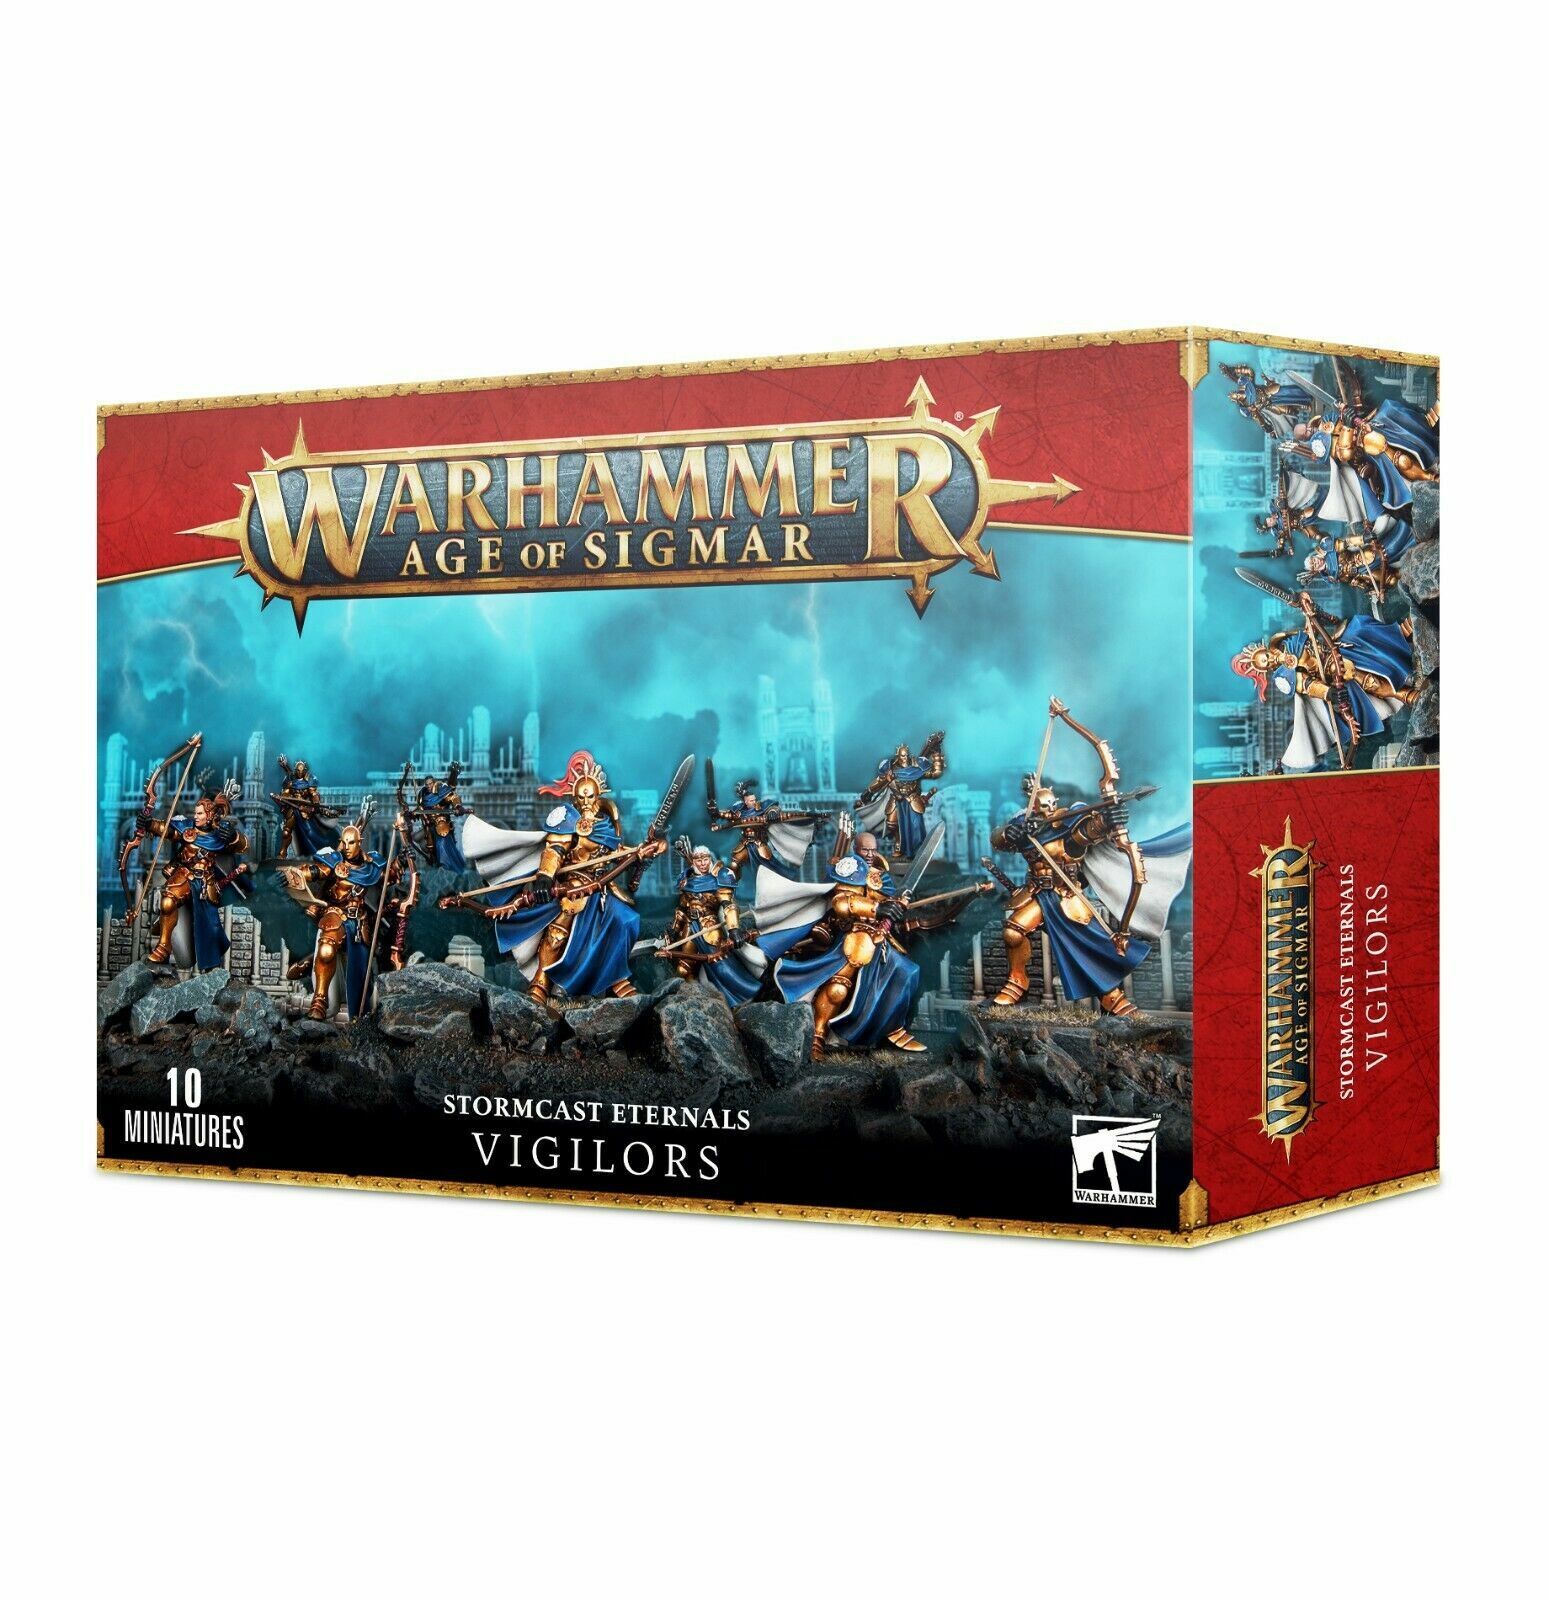 At the price Warhammer Age of Sigmar NIB Vigilors Seattle Mall Stormcast Eternals